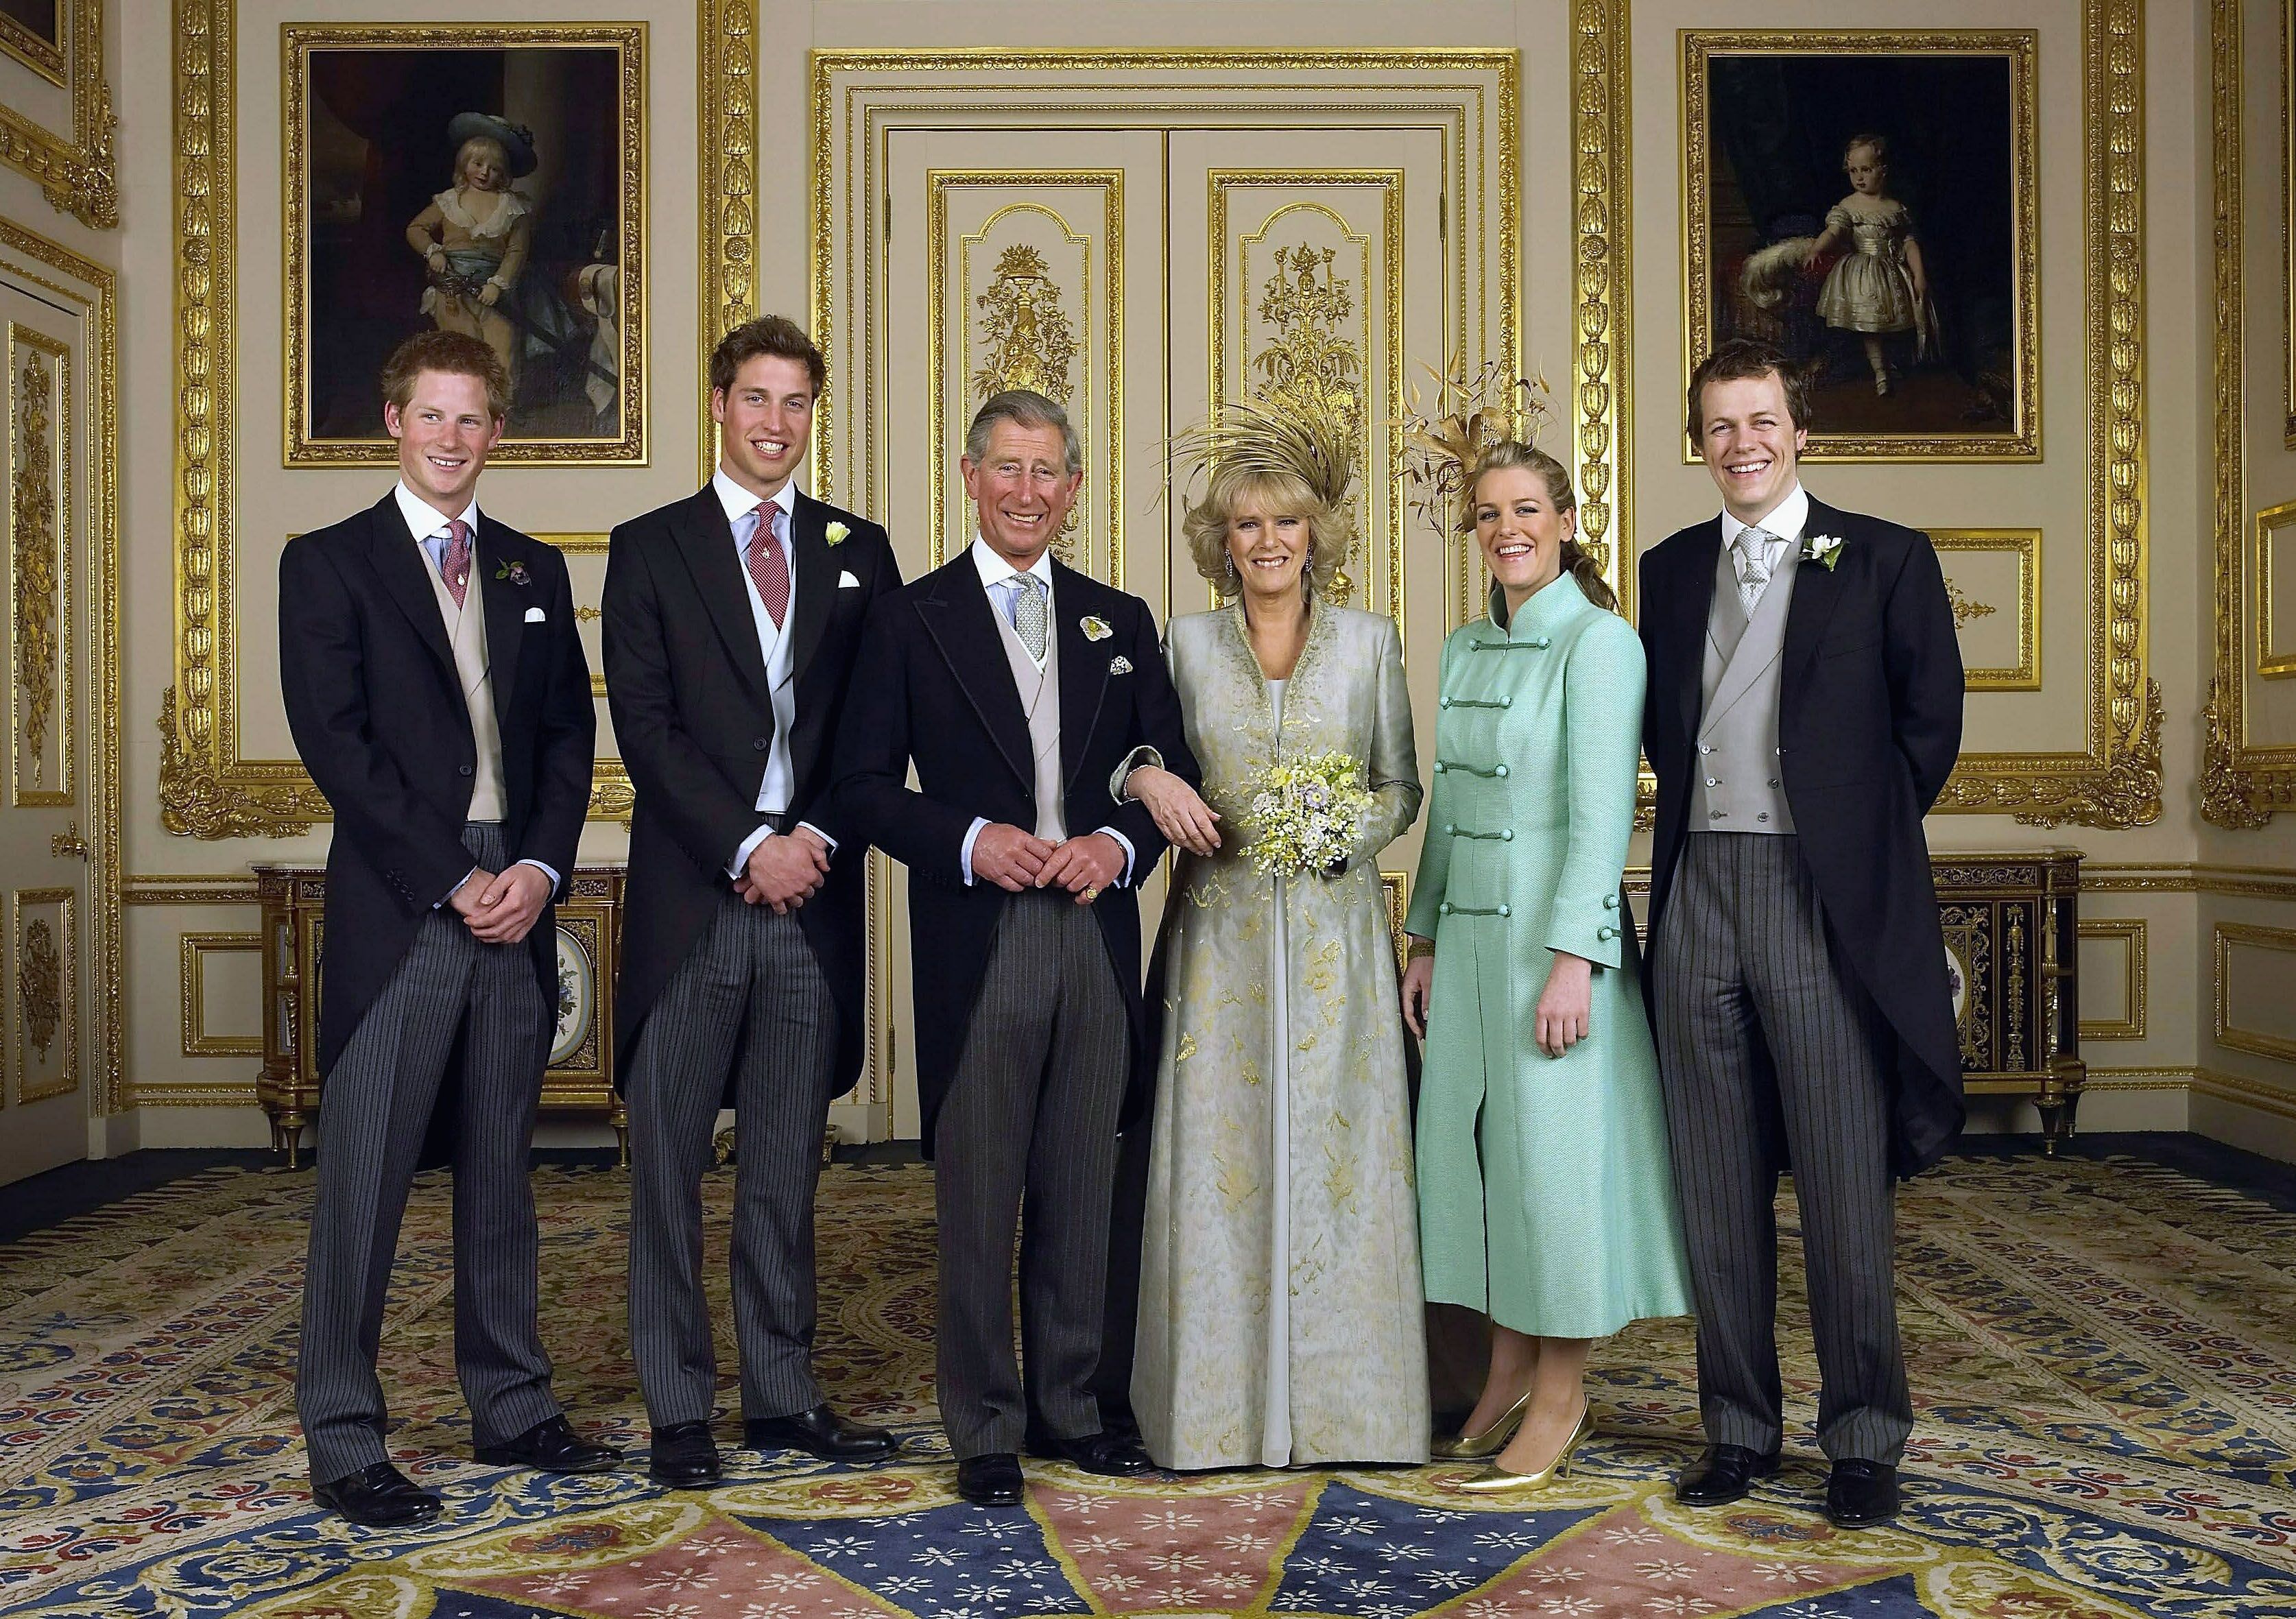 Prince Charles and Duchess Camilla at their wedding with their children in 2005 | Source: Getty Images